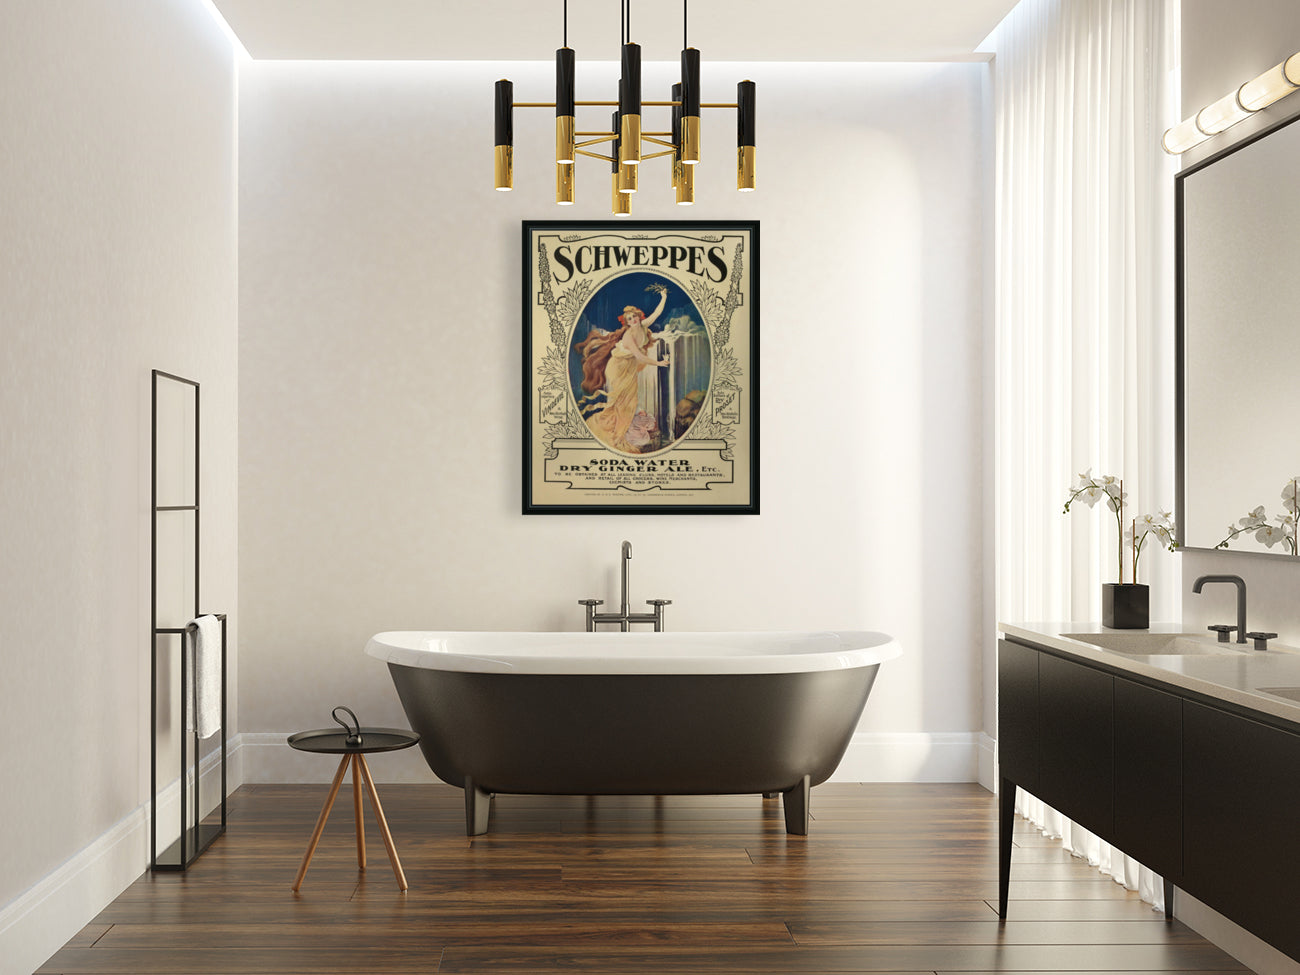 Art nouveau print for Schweppes in 1908, available in acrylic, canvas and others